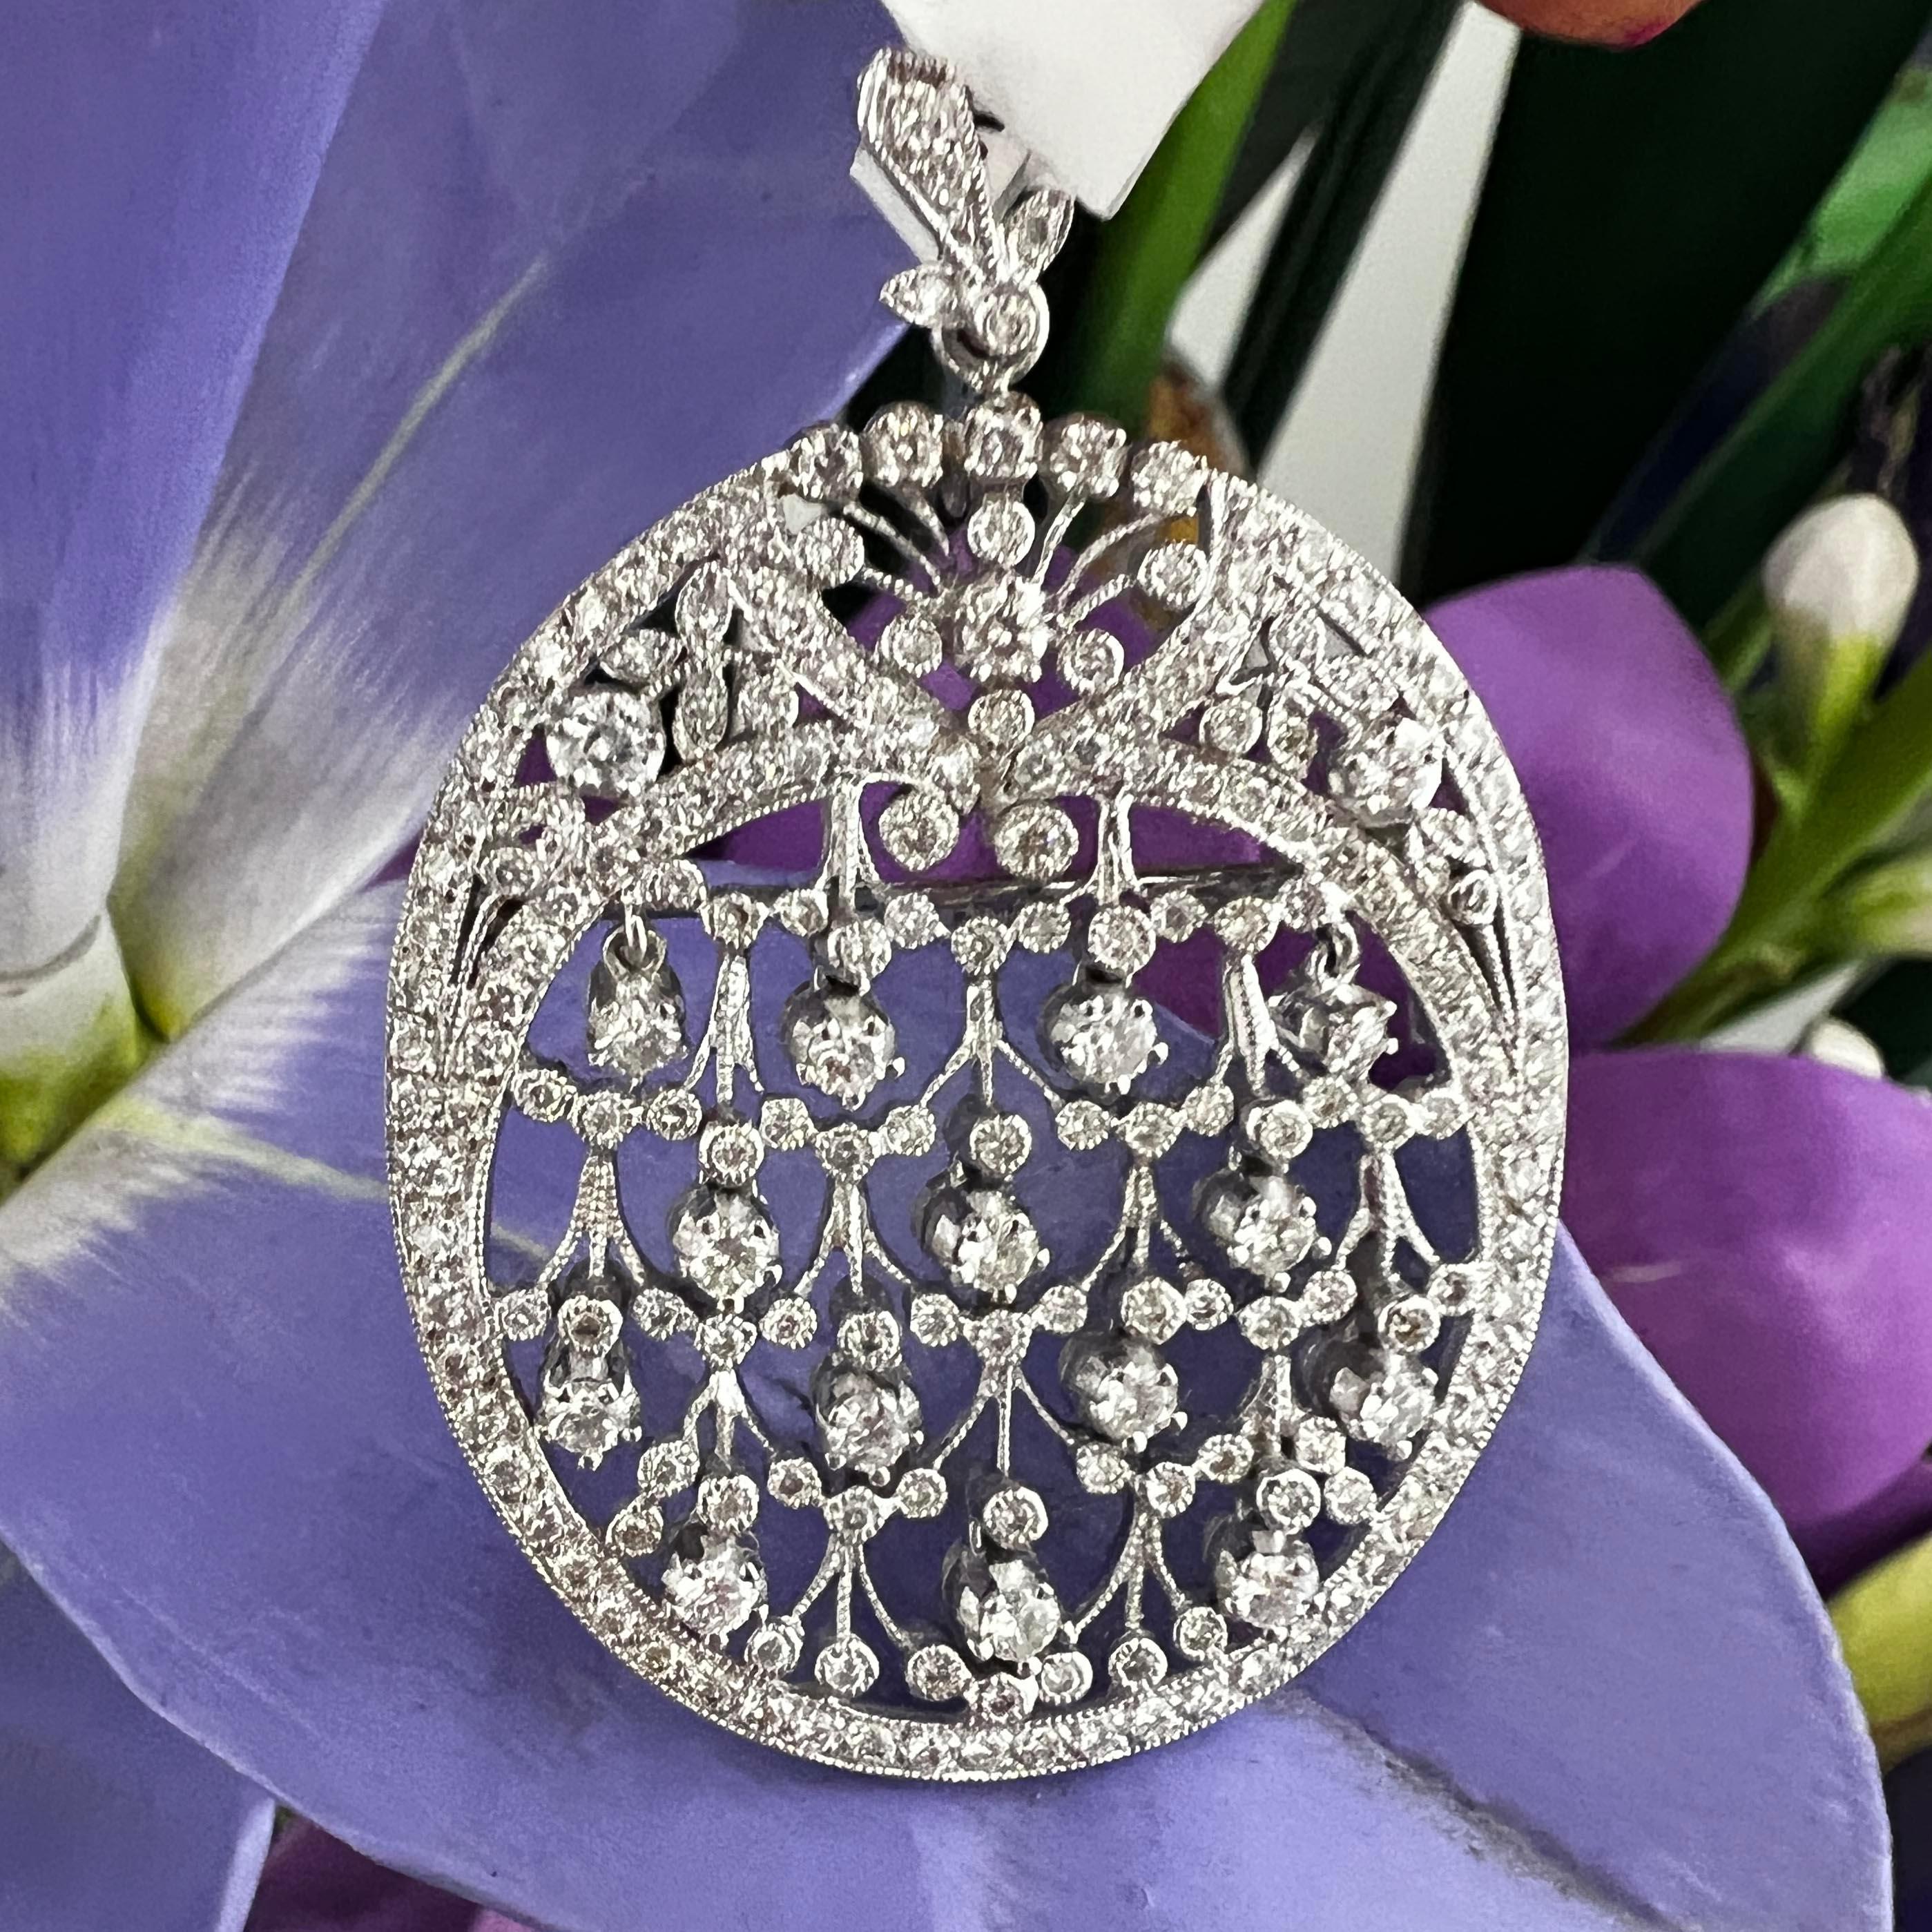 Exquisite diamond Art Deco-inspired Pin Pendant, by Sonia B., a true masterpiece that effortlessly captures the essence of timeless elegance. Crafted in 18k white gold with meticulous attention to detail, this large oval-shaped accessory perfectly